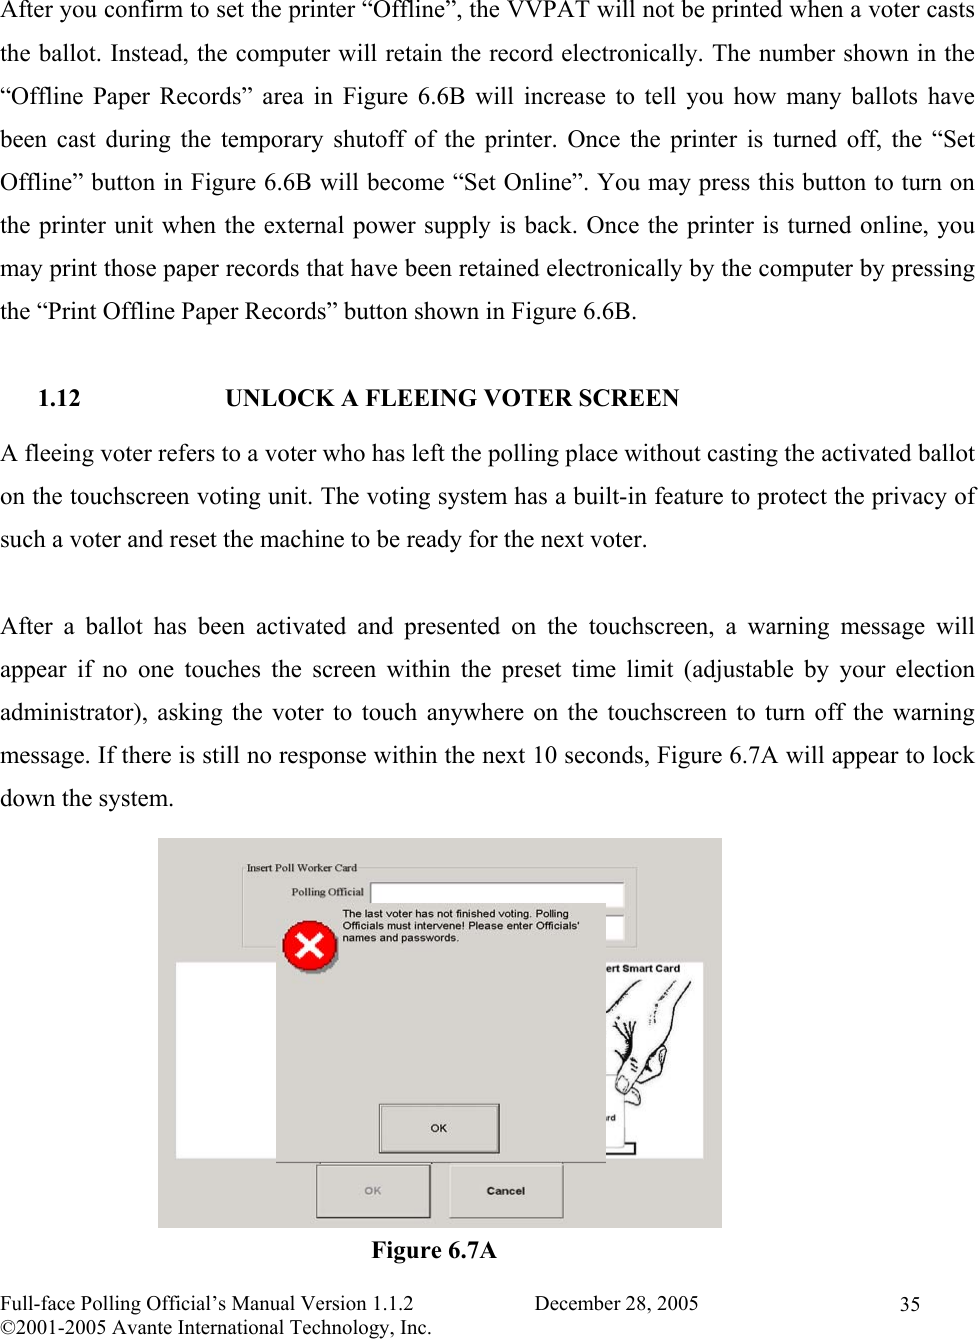    Full-face Polling Official’s Manual Version 1.1.2                       December 28, 2005 ©2001-2005 Avante International Technology, Inc.   35 After you confirm to set the printer “Offline”, the VVPAT will not be printed when a voter casts the ballot. Instead, the computer will retain the record electronically. The number shown in the “Offline Paper Records” area in Figure 6.6B will increase to tell you how many ballots have been cast during the temporary shutoff of the printer. Once the printer is turned off, the “Set Offline” button in Figure 6.6B will become “Set Online”. You may press this button to turn on the printer unit when the external power supply is back. Once the printer is turned online, you may print those paper records that have been retained electronically by the computer by pressing the “Print Offline Paper Records” button shown in Figure 6.6B.  1.12  UNLOCK A FLEEING VOTER SCREEN A fleeing voter refers to a voter who has left the polling place without casting the activated ballot on the touchscreen voting unit. The voting system has a built-in feature to protect the privacy of such a voter and reset the machine to be ready for the next voter.  After a ballot has been activated and presented on the touchscreen, a warning message will appear if no one touches the screen within the preset time limit (adjustable by your election administrator), asking the voter to touch anywhere on the touchscreen to turn off the warning message. If there is still no response within the next 10 seconds, Figure 6.7A will appear to lock down the system.             Figure 6.7A 